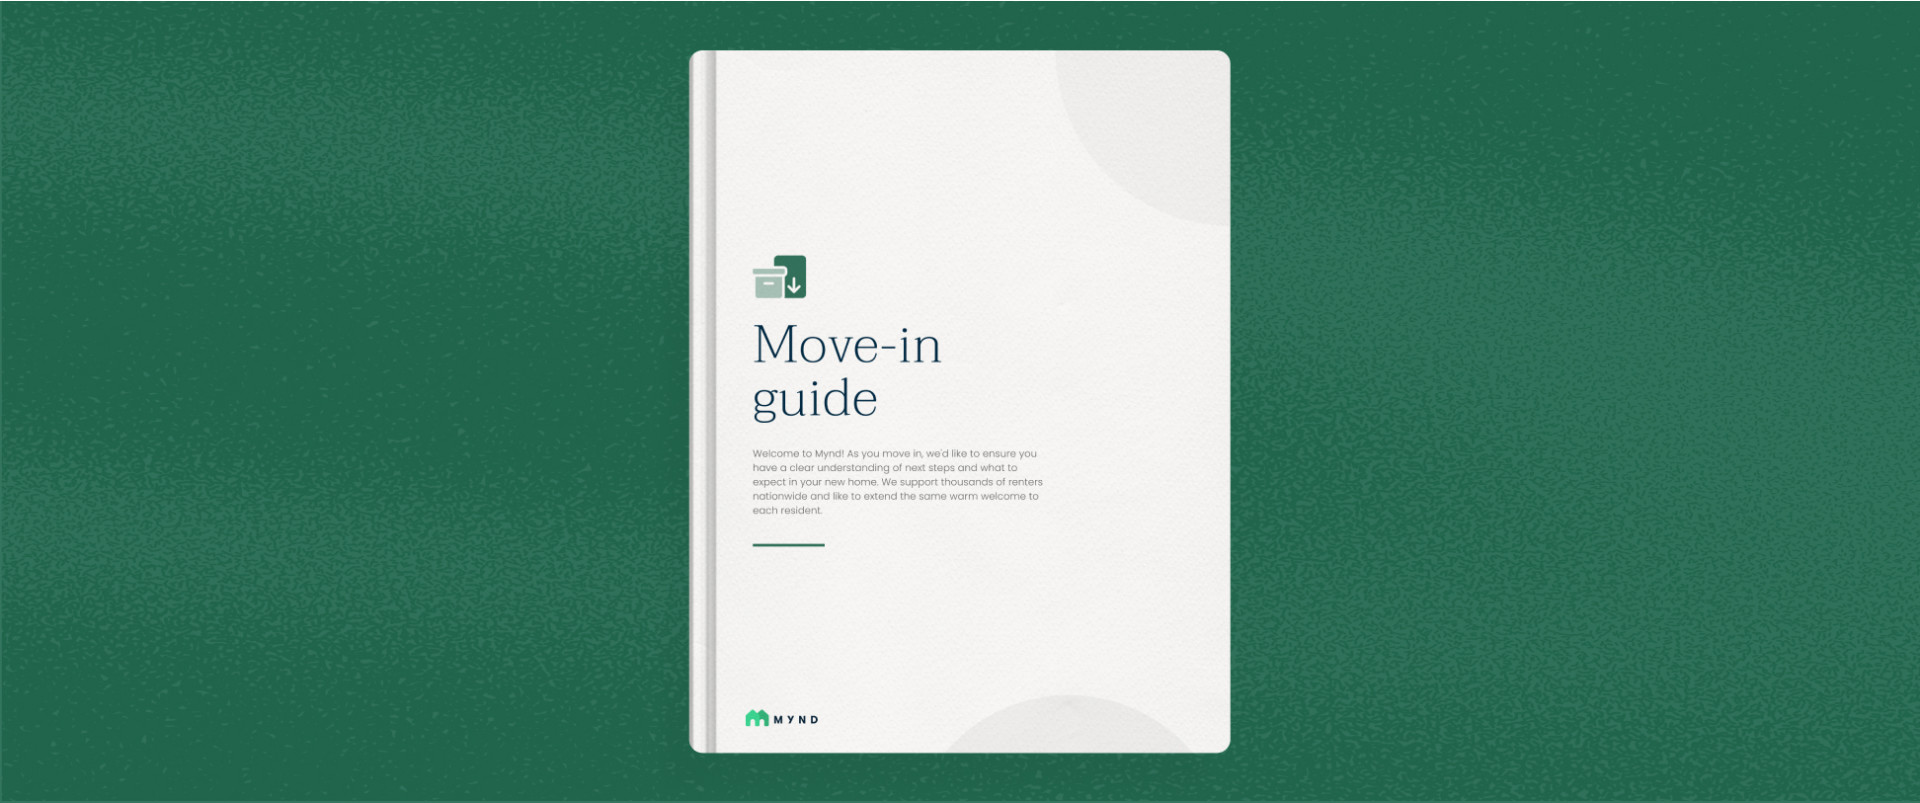 Image of a book titled Move-in guide